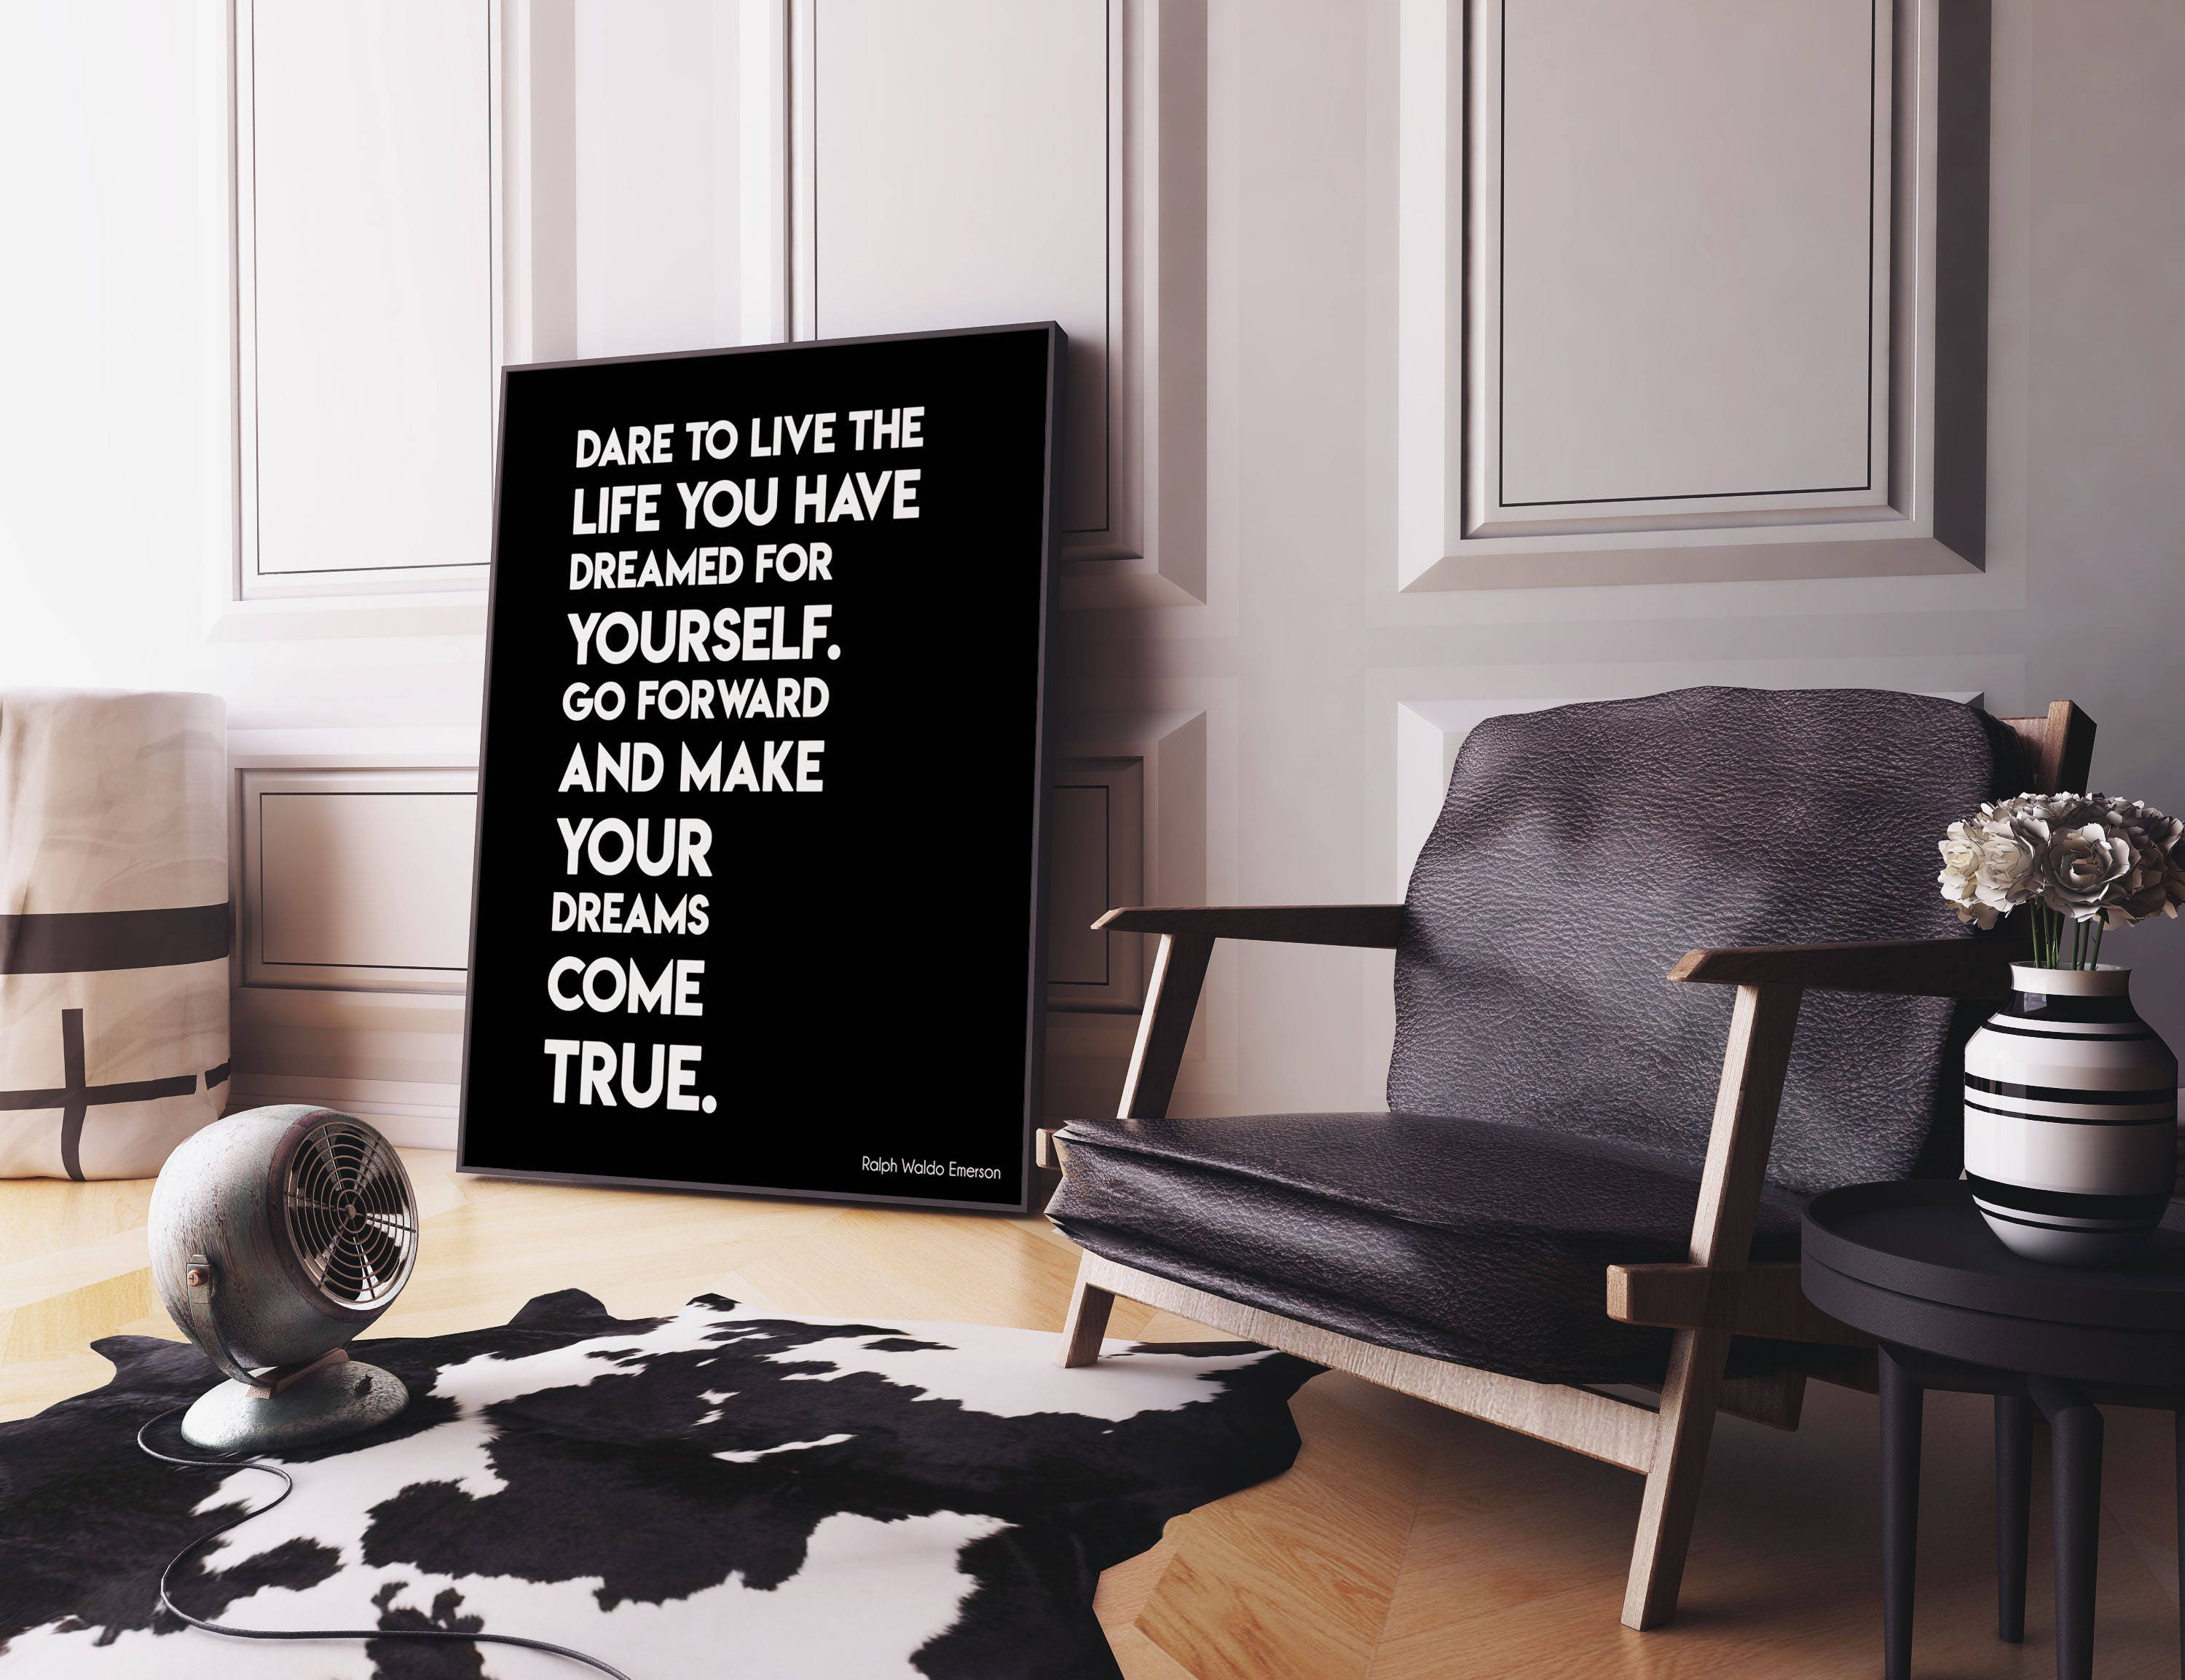 Ralph Waldo Emerson Inspirational Gift Positive Quote, Dare To Live The Life You Have Dreamed Black & White Art Inspirational Print